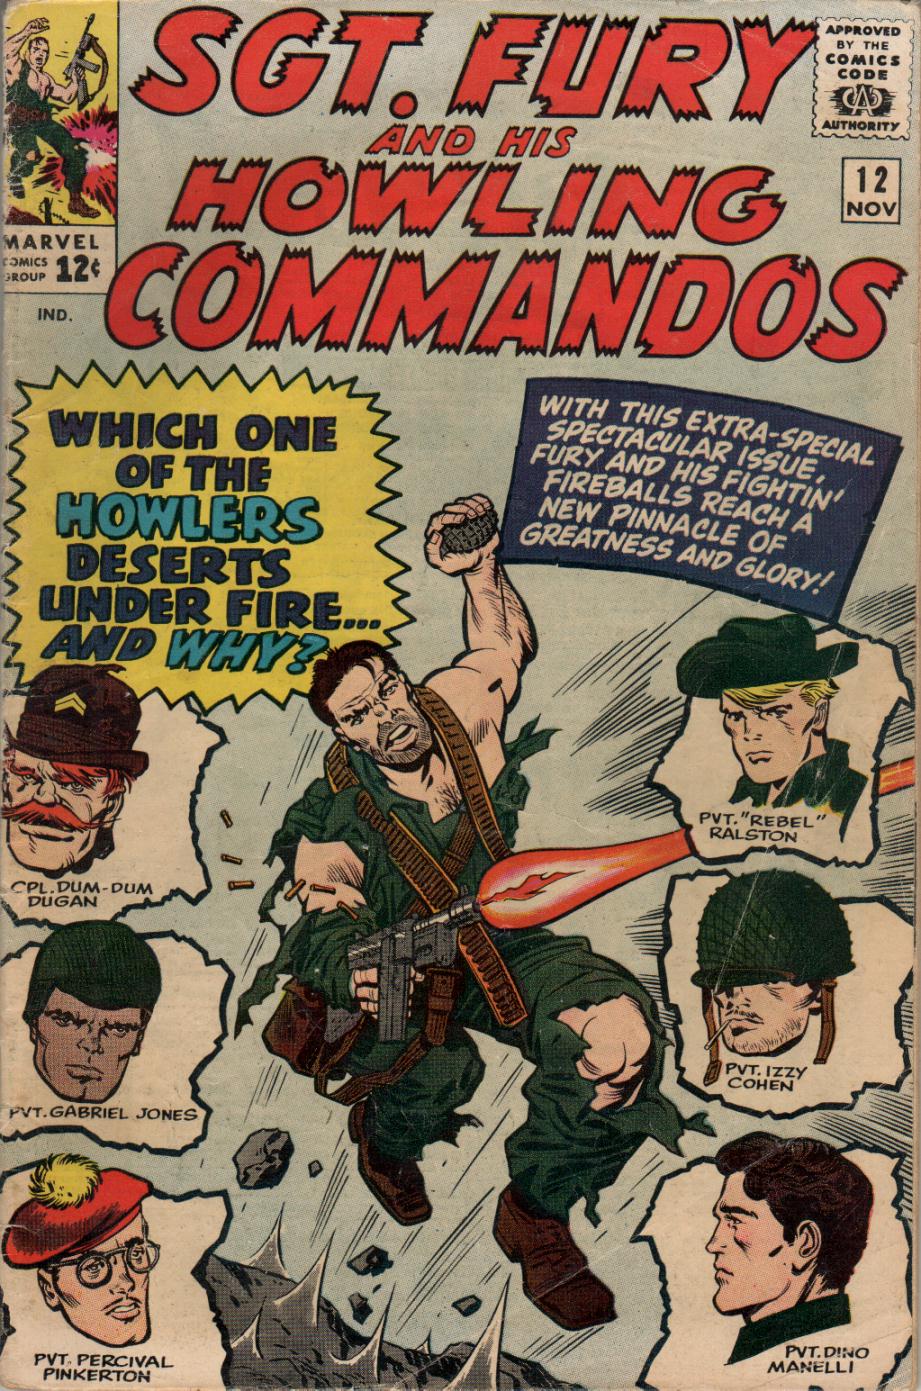 Sgt Fury and his Howling Commandos Vol. 1 #12